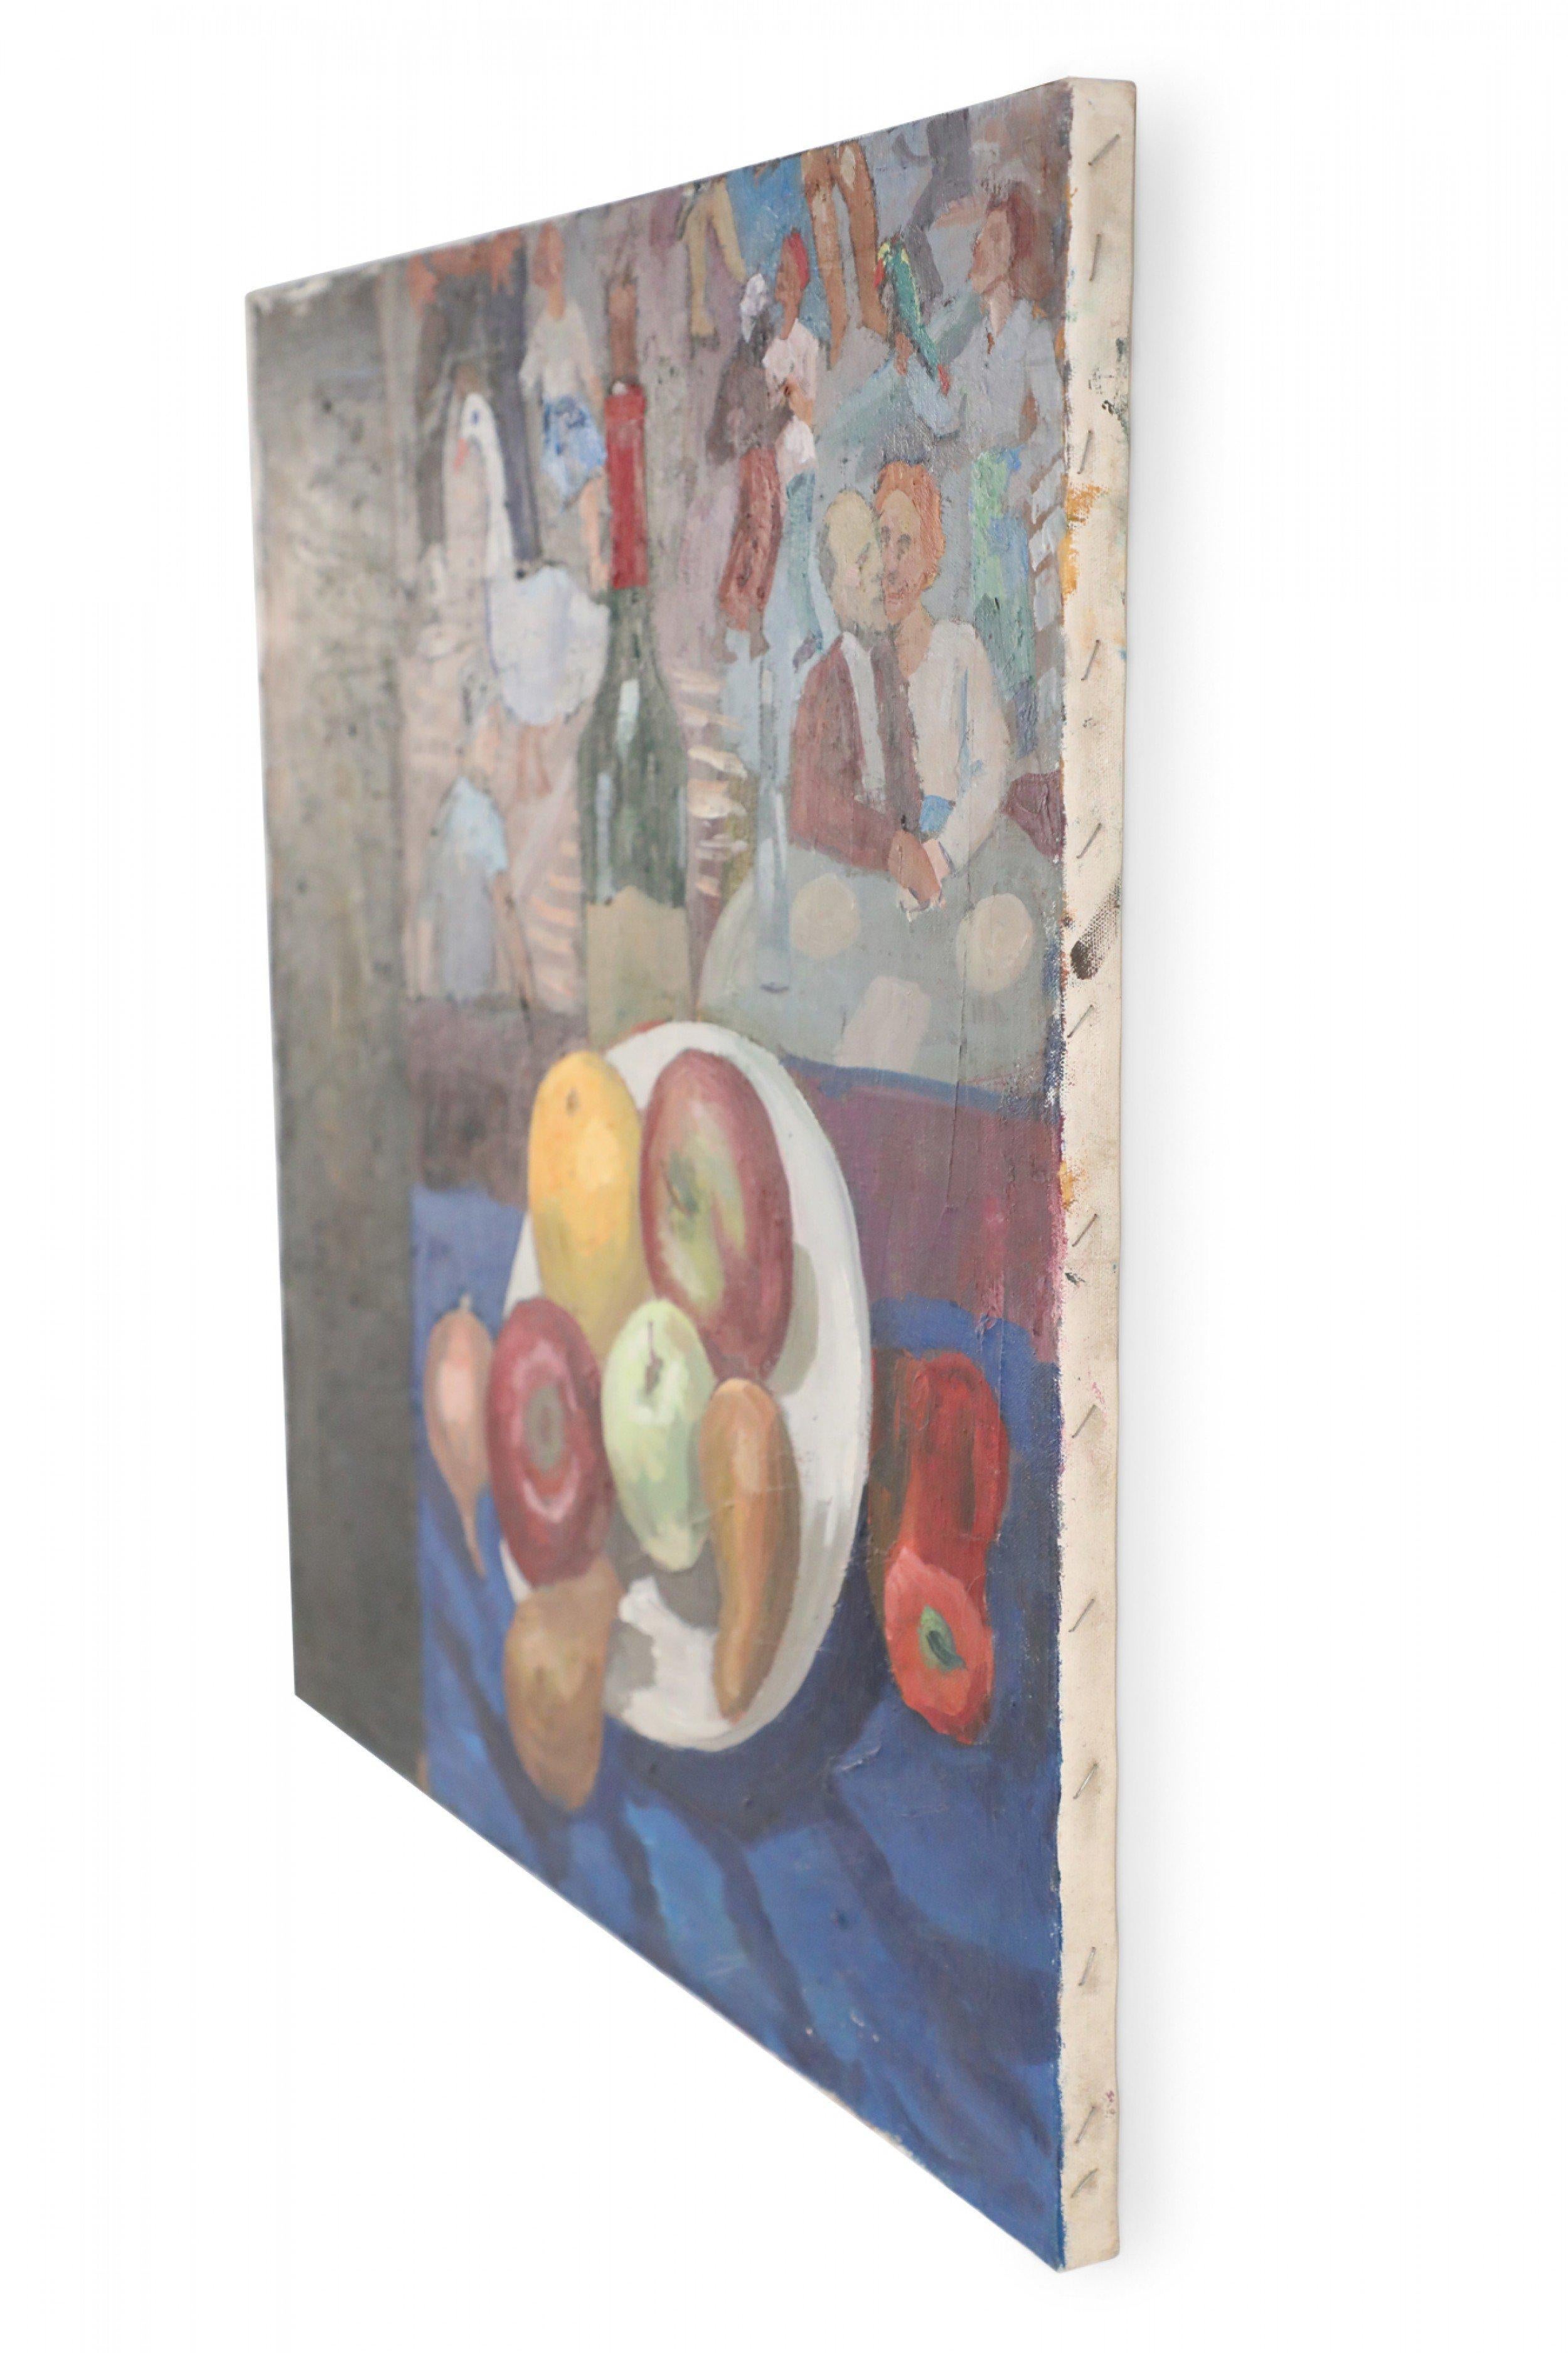 Vintage (20th century) acrylic painting of a fruit bowl in front of a window revealing a bustling street scene with people and birds, on unframed square canvas.
       